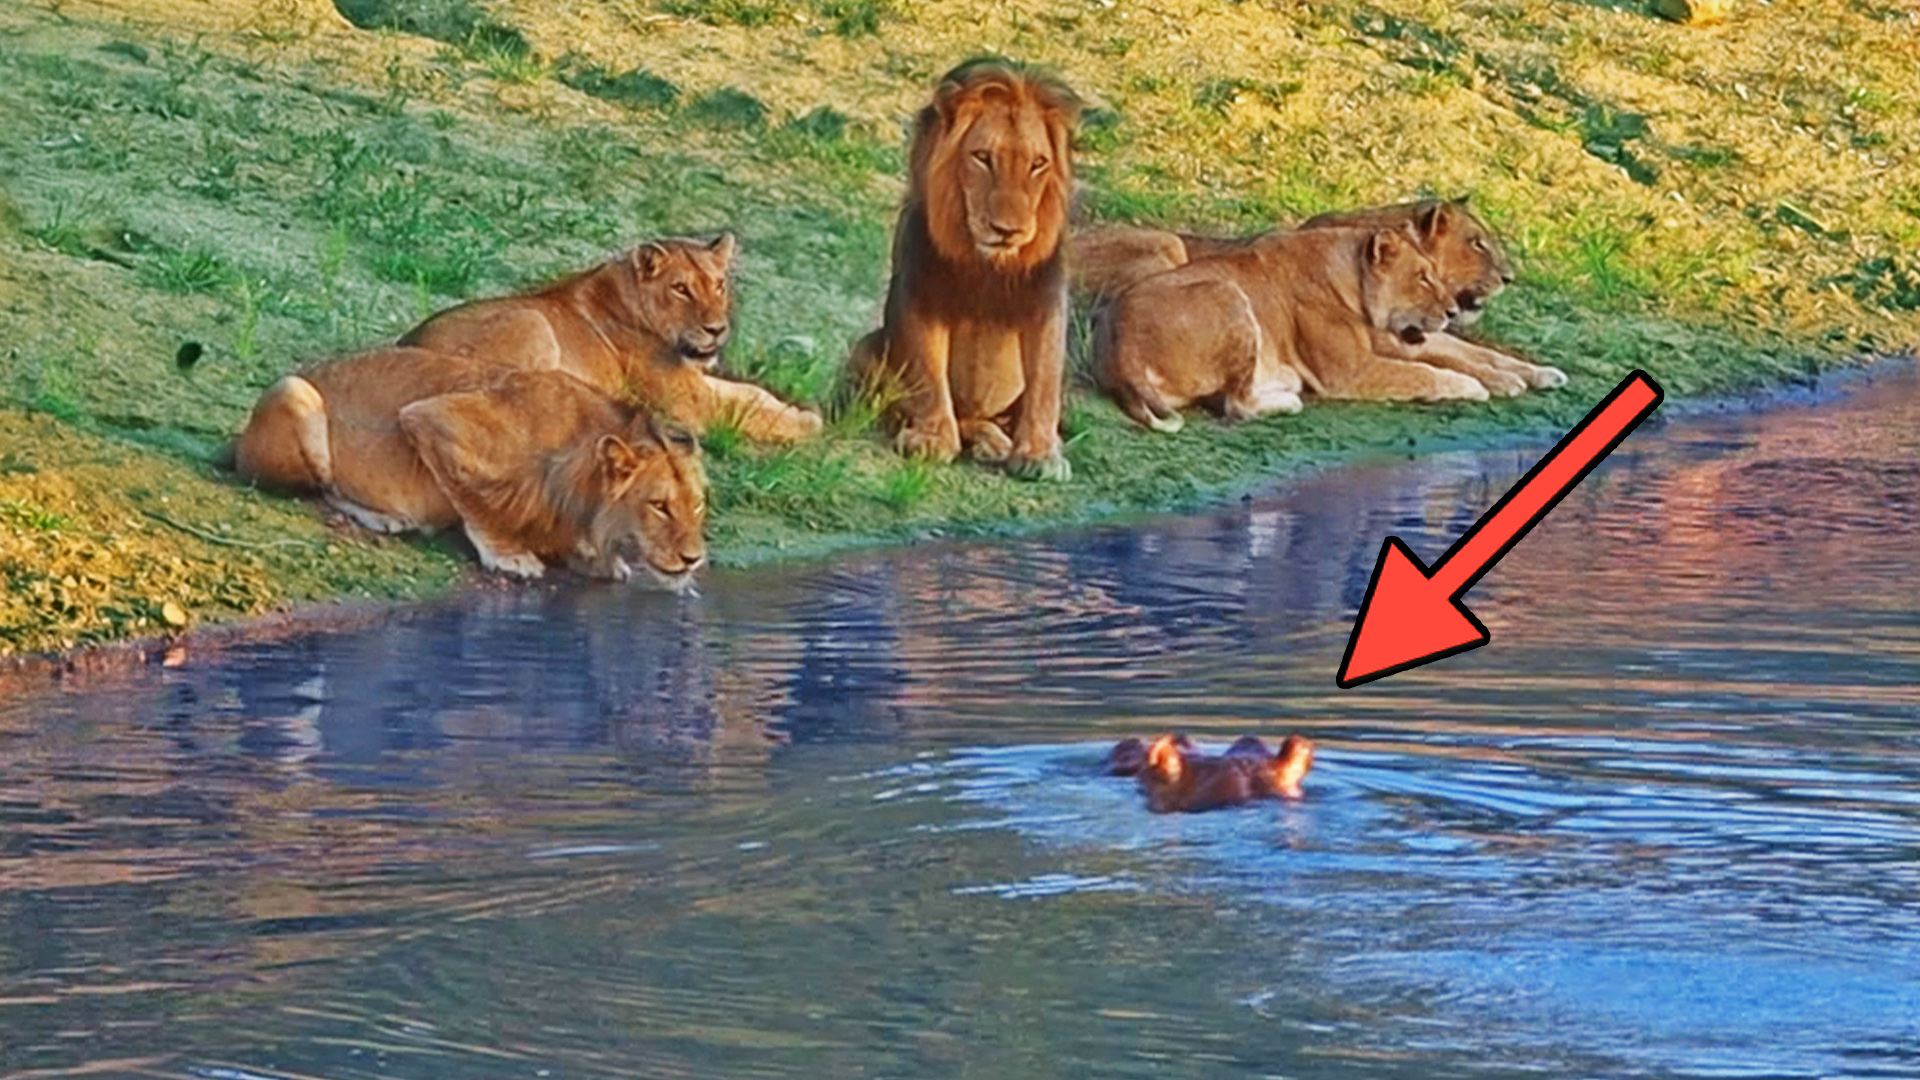 Hippo Sneaks up on Lions